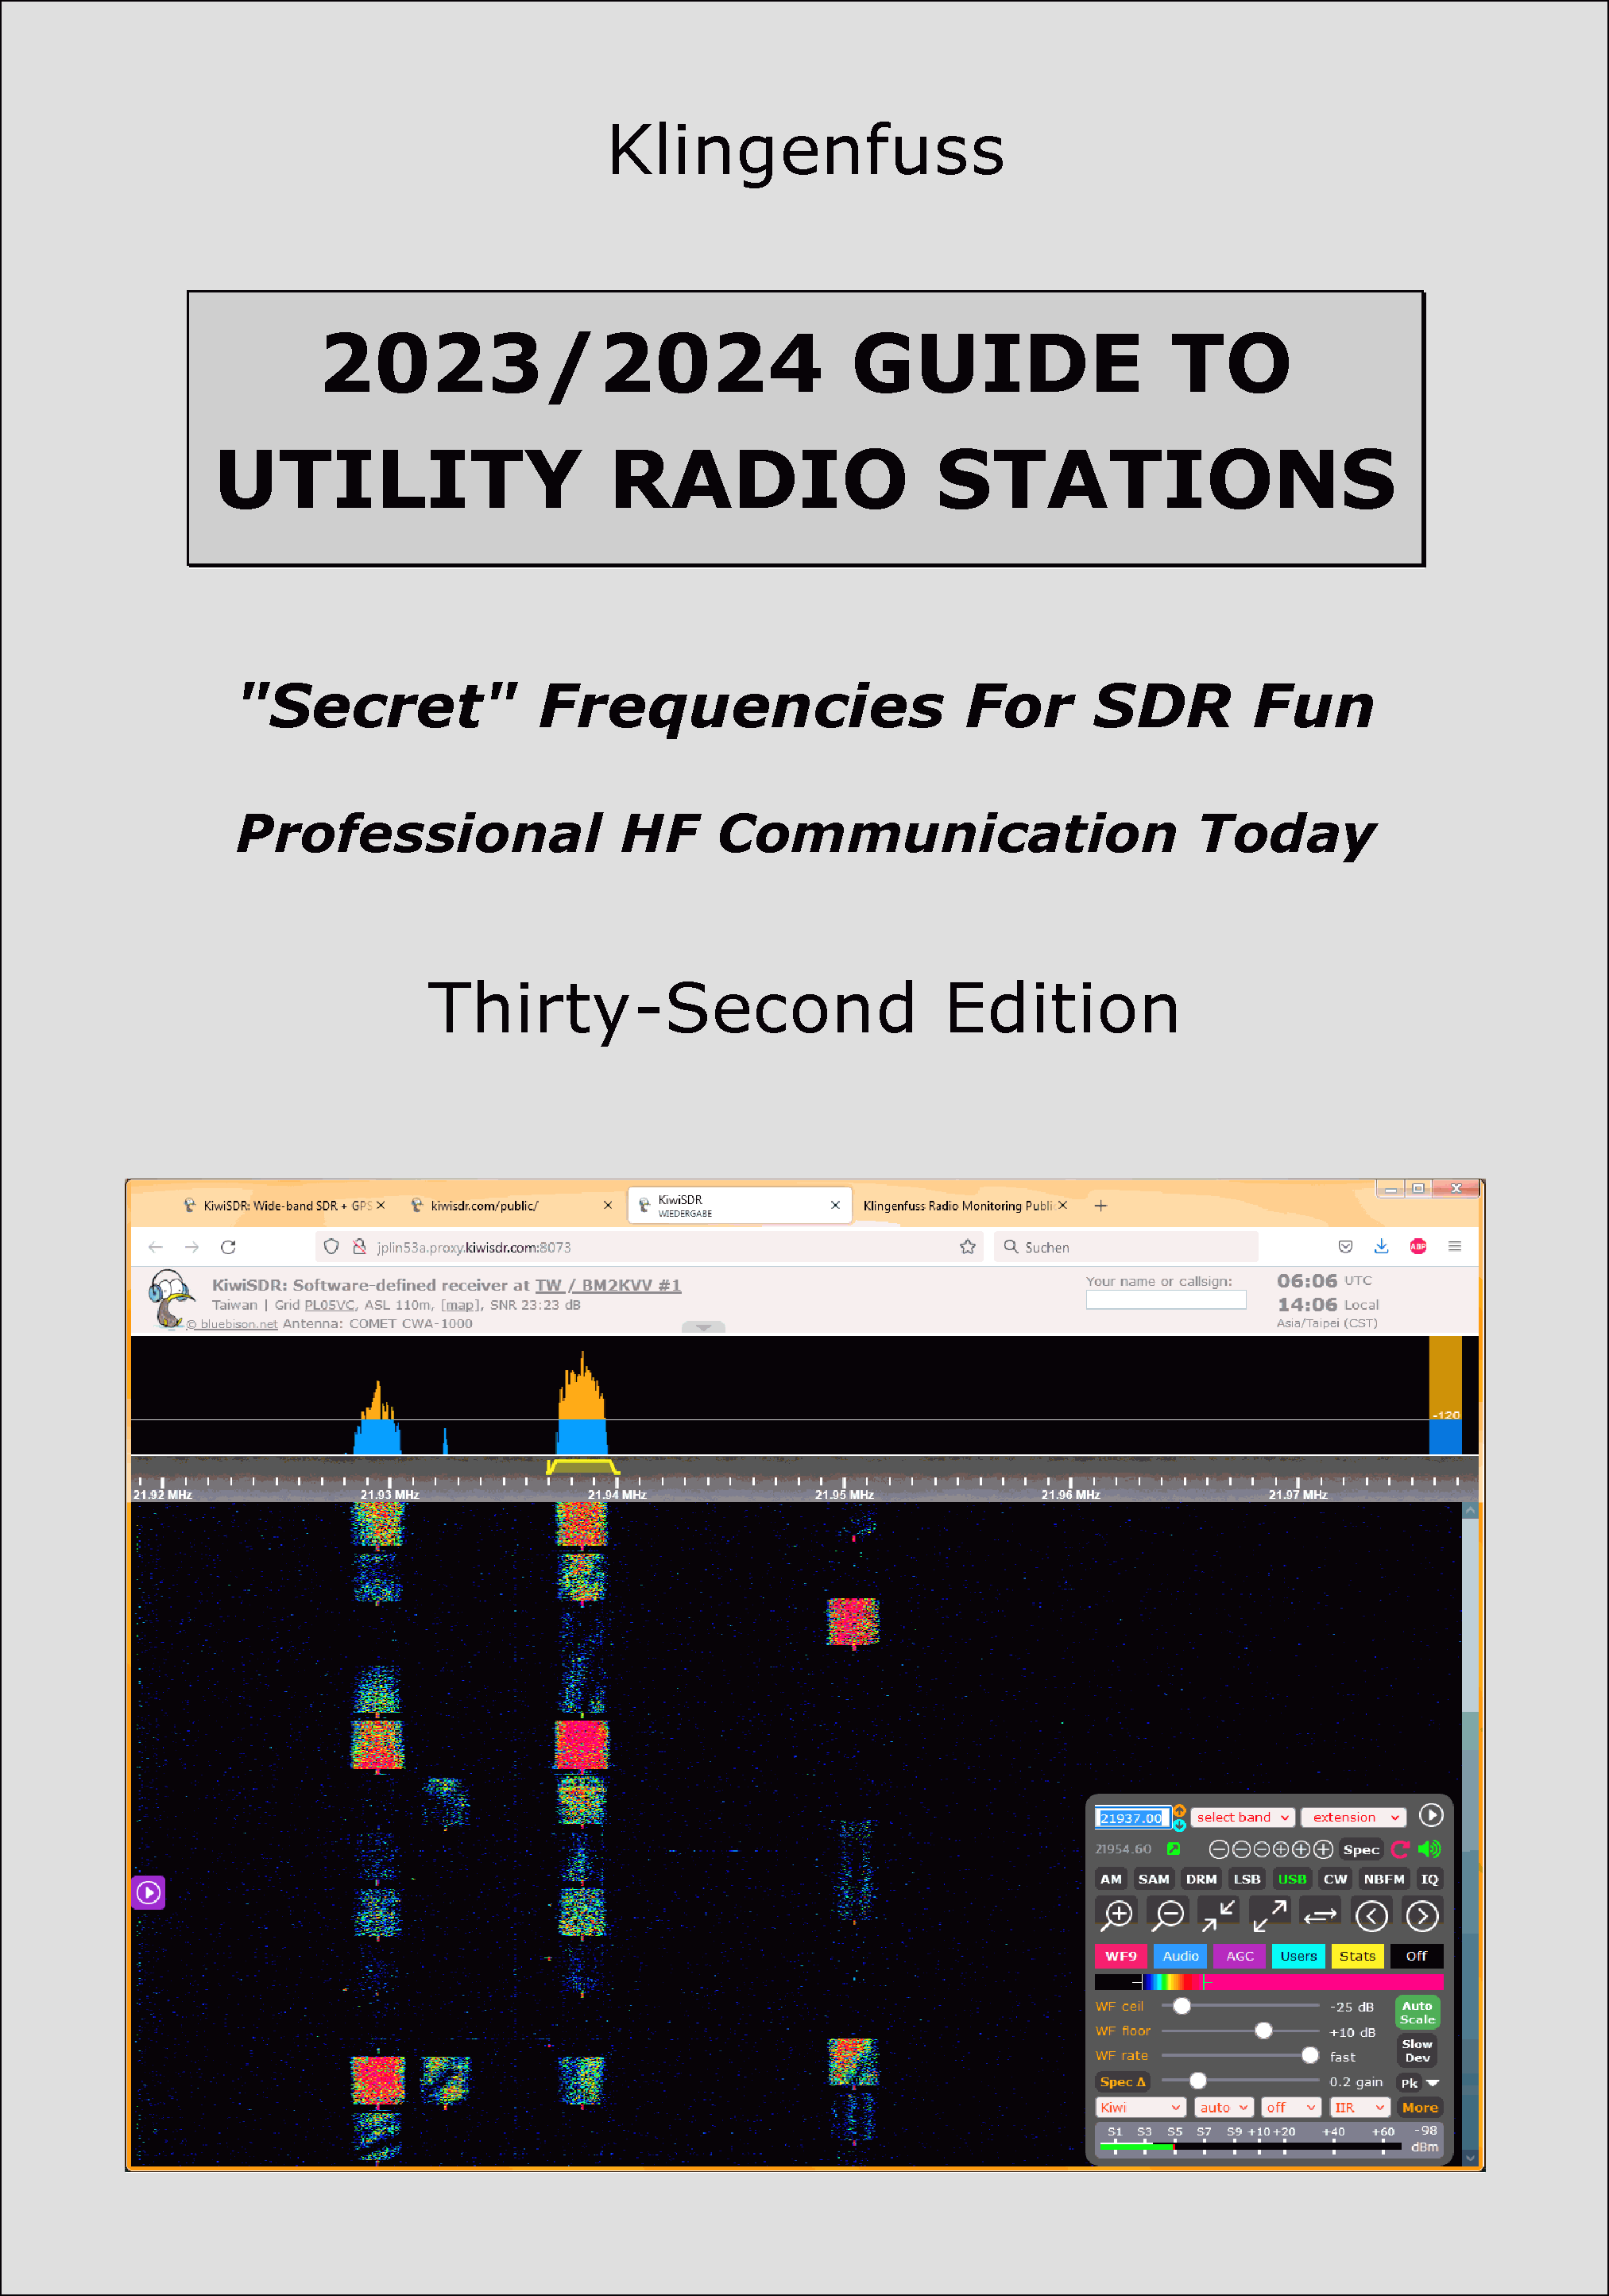 Guide to Radio Stations - Communication Today